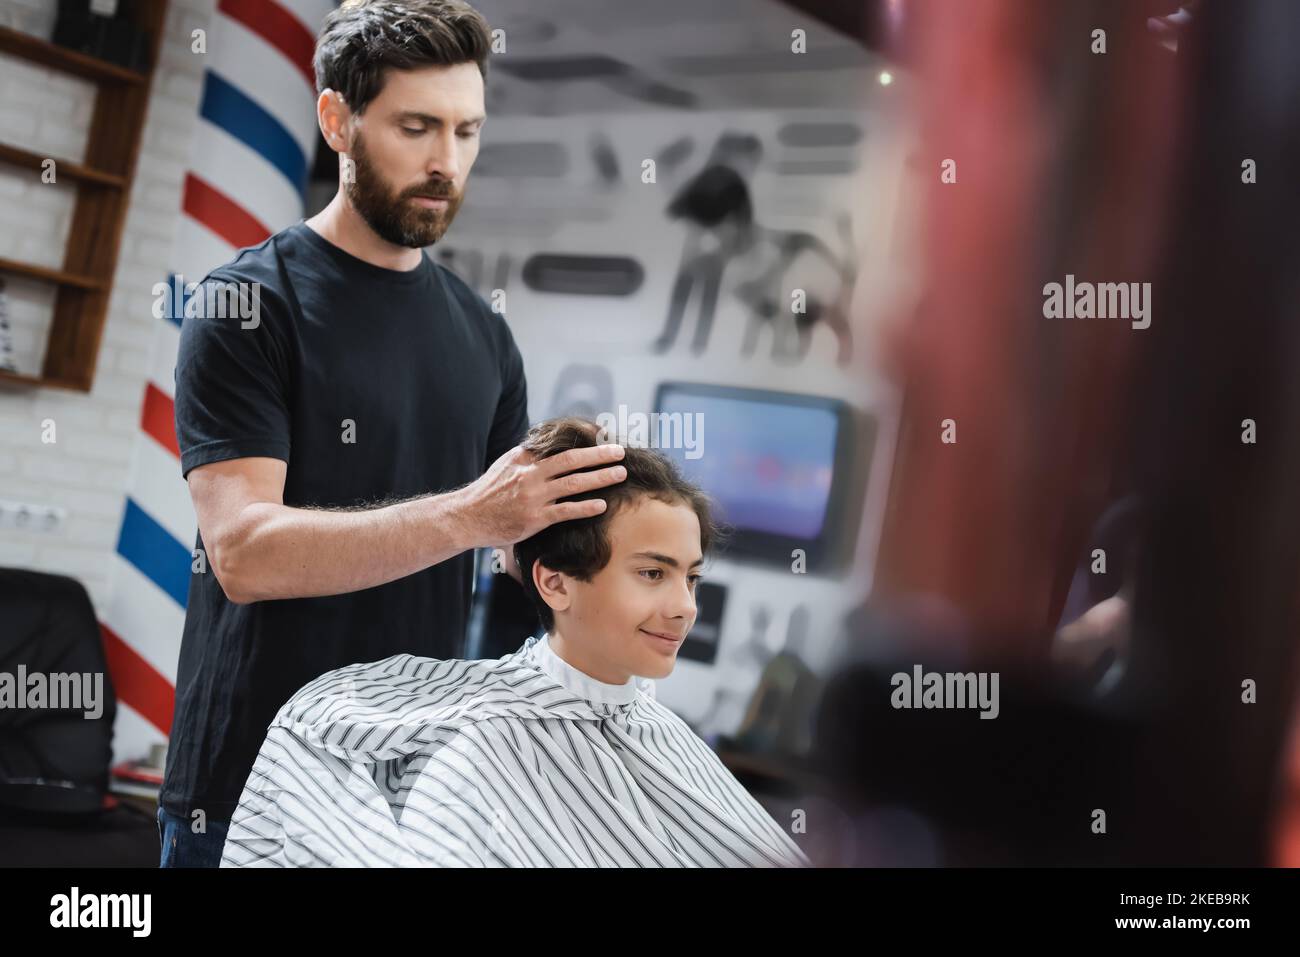 Bearded hairstylist styling hair of smiling teenage boy in beauty salon,stock image Stock Photo